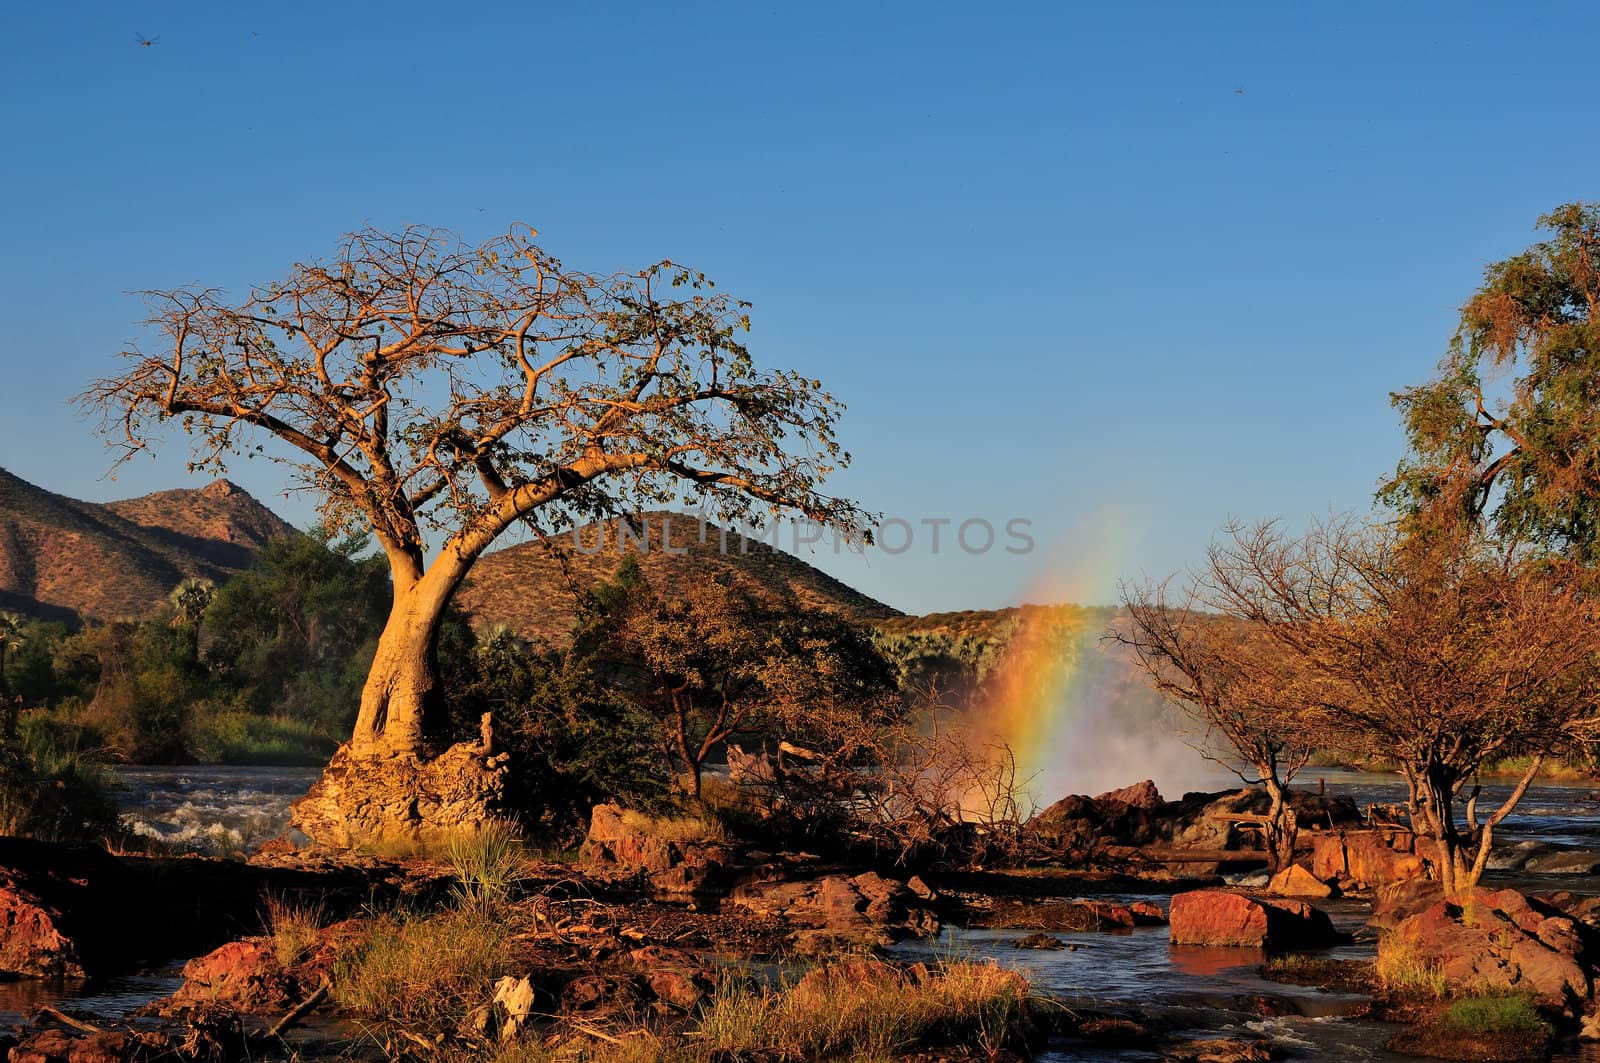 A small portion of the Epupa waterfalls, Namibia at sunset